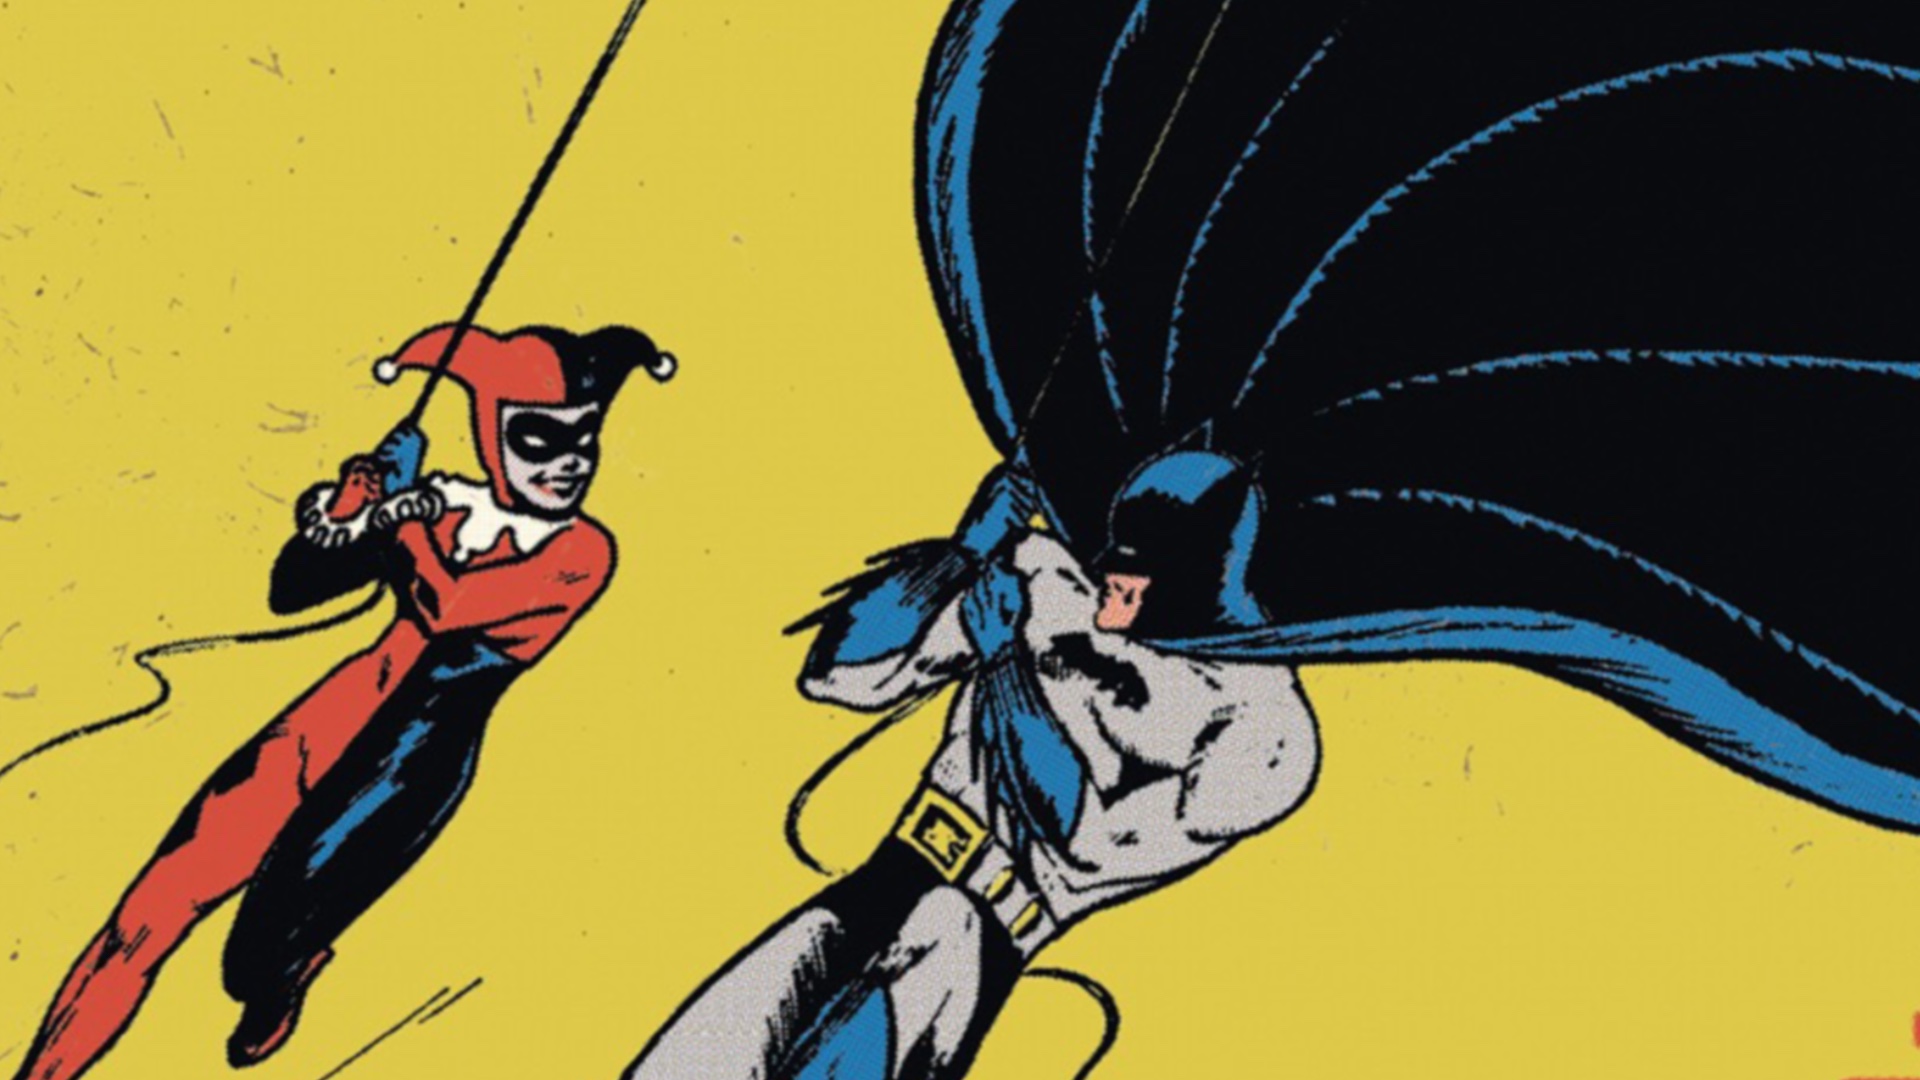 DC pays homage to classic comic covers with Harley Quinn, the Justice League, Batman, and more